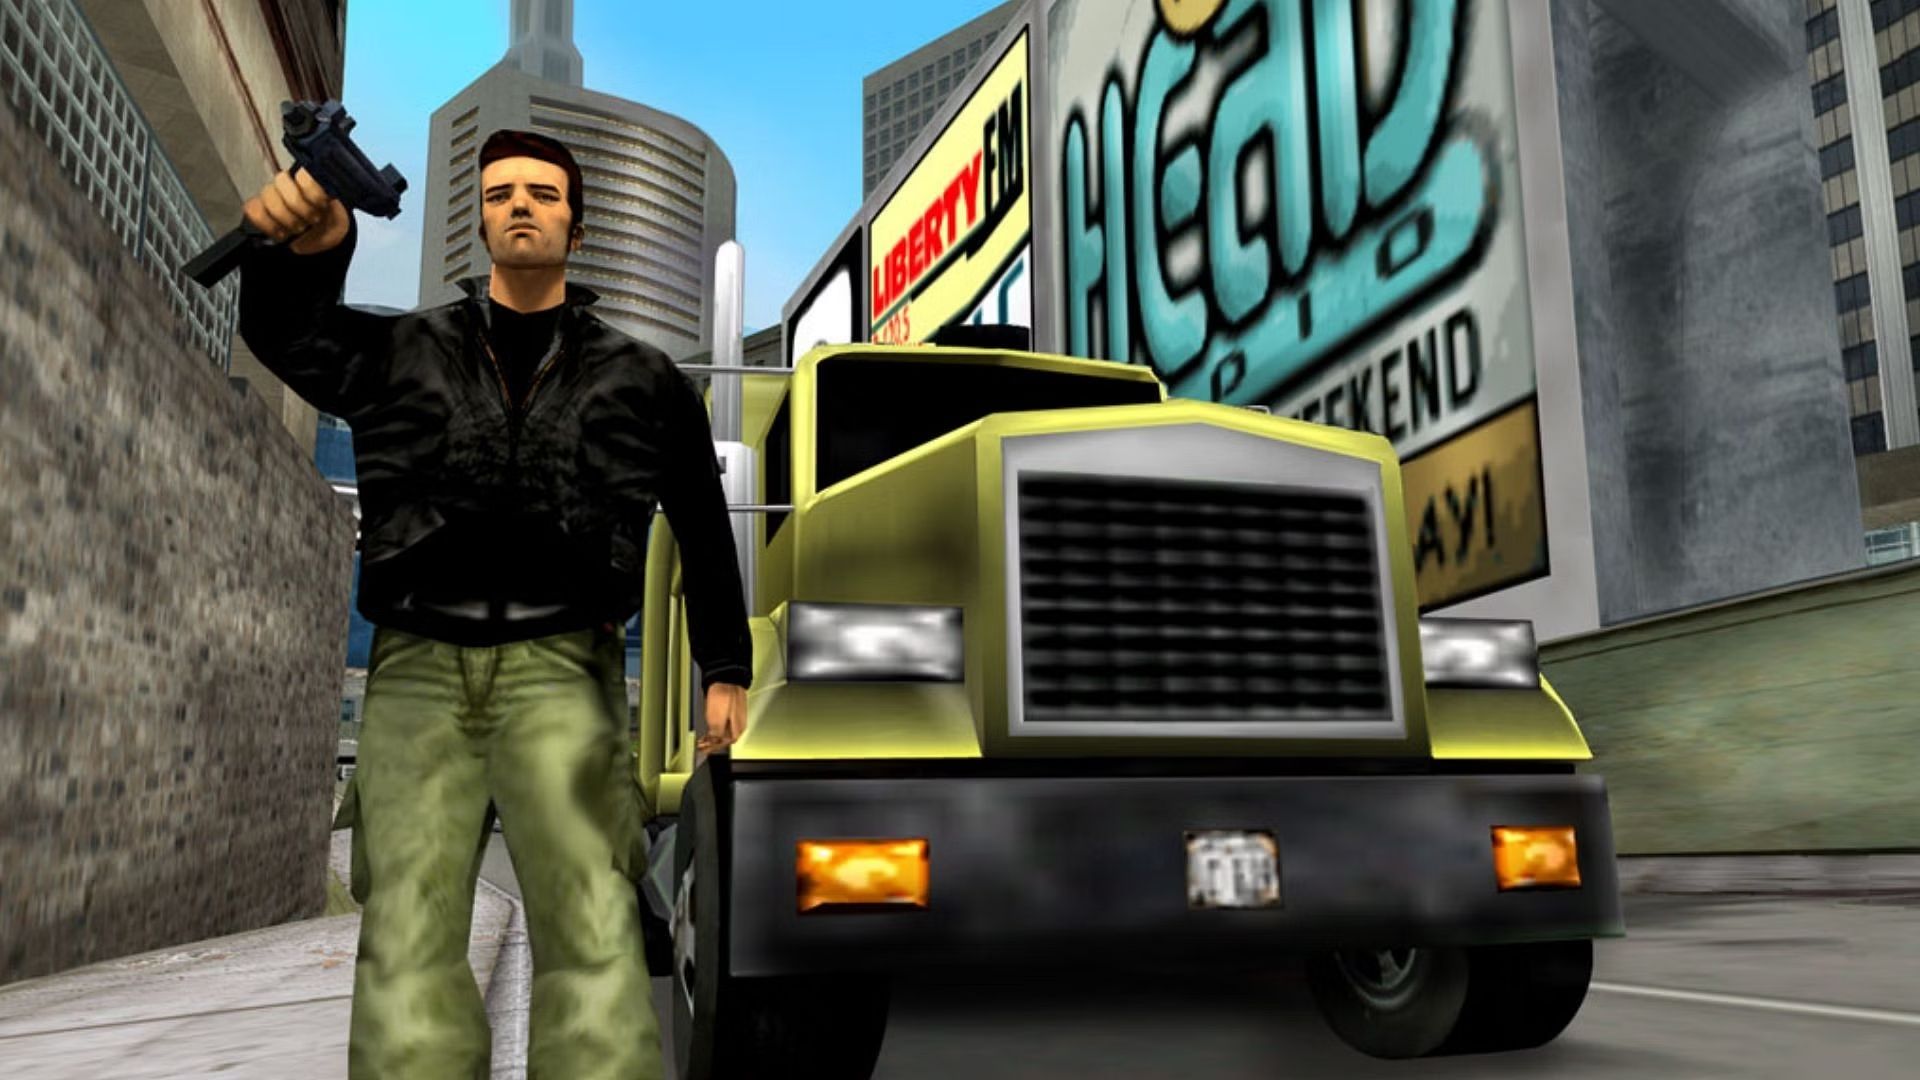 Before GTA 3: The Games That Paved the Way for Open-World Sandbox  Adventures. Gaming news - eSports events review, analytics, announcements,  interviews, statistics - qo8JwueLB